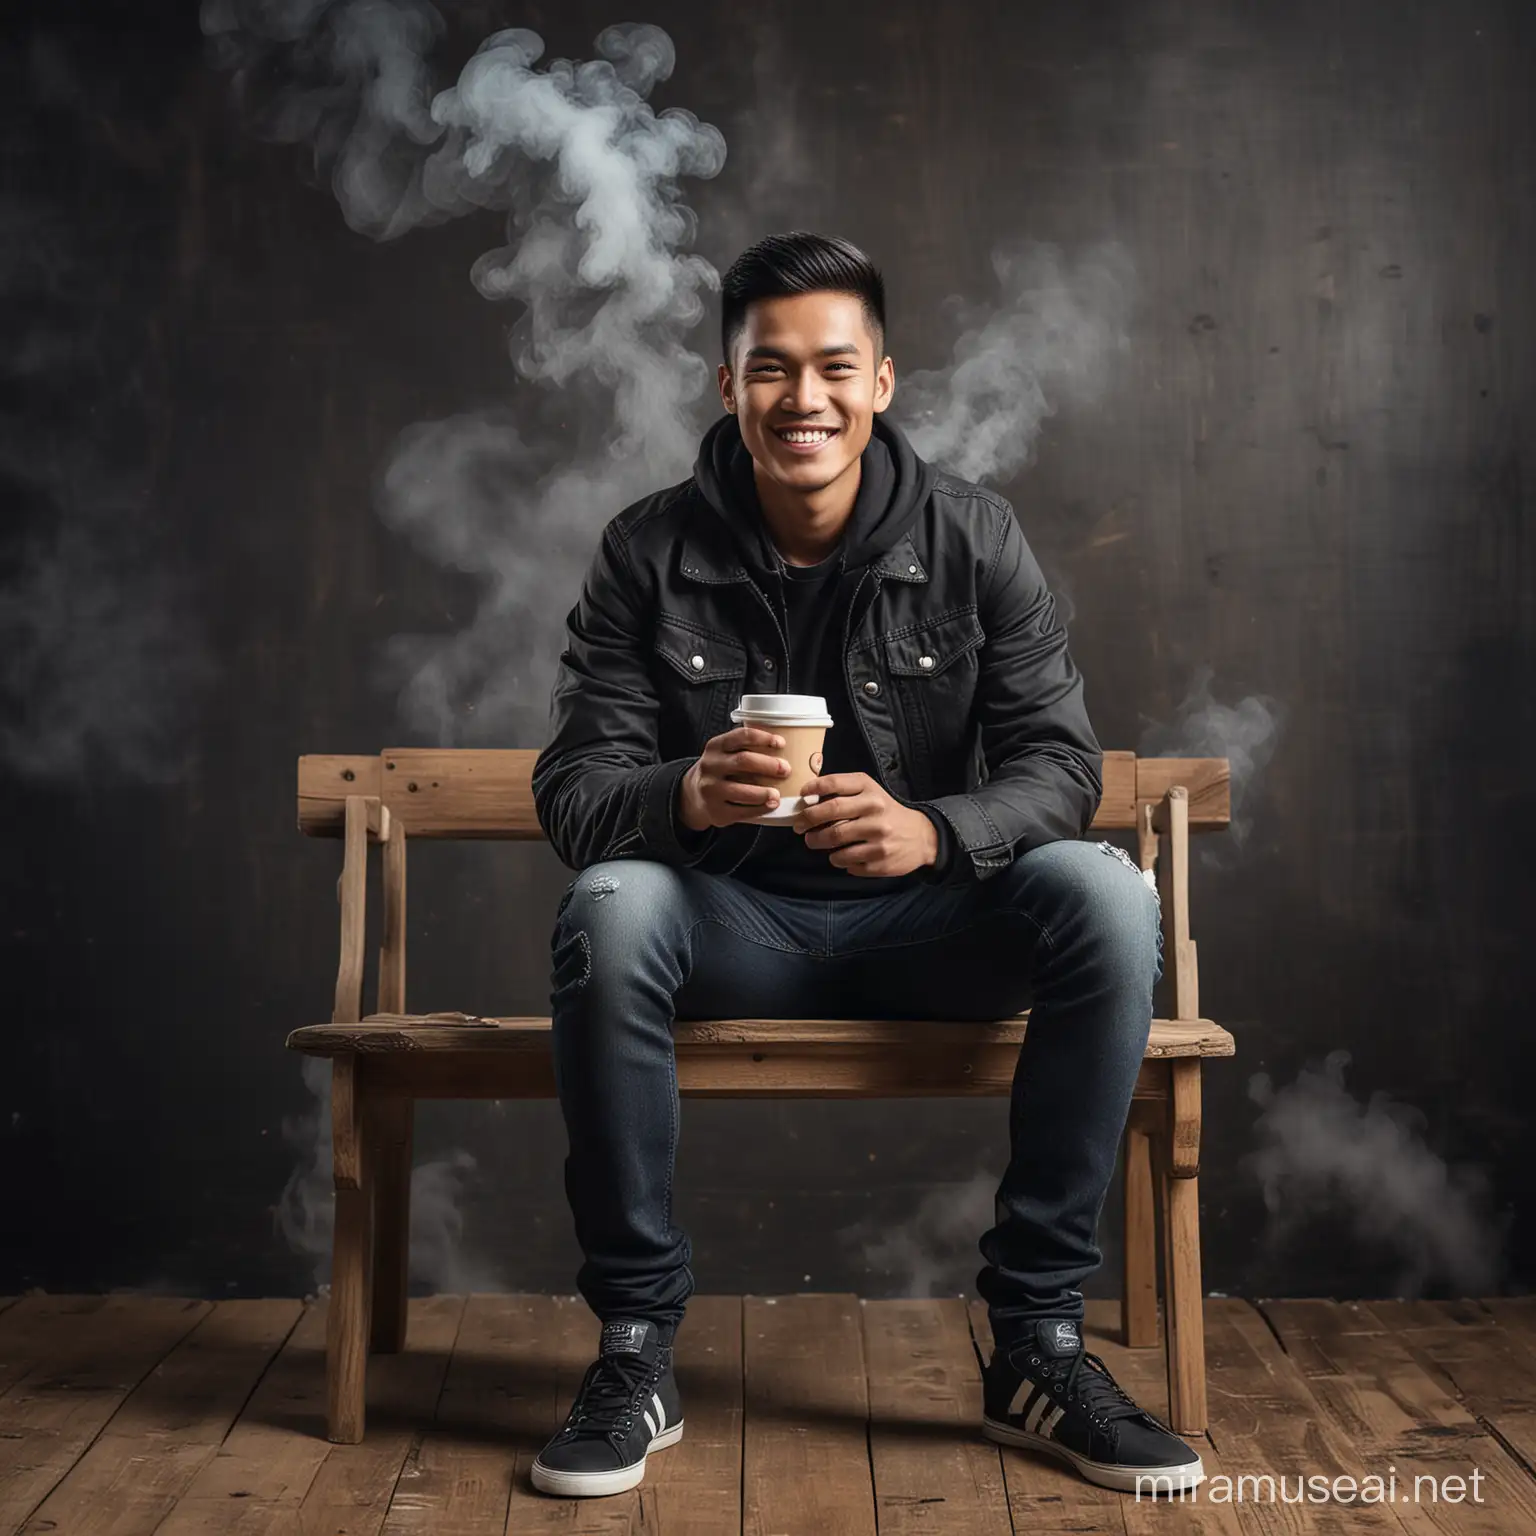 Smiling Indonesian Man Enjoying Coffee on Wooden Chair in Rustic Setting